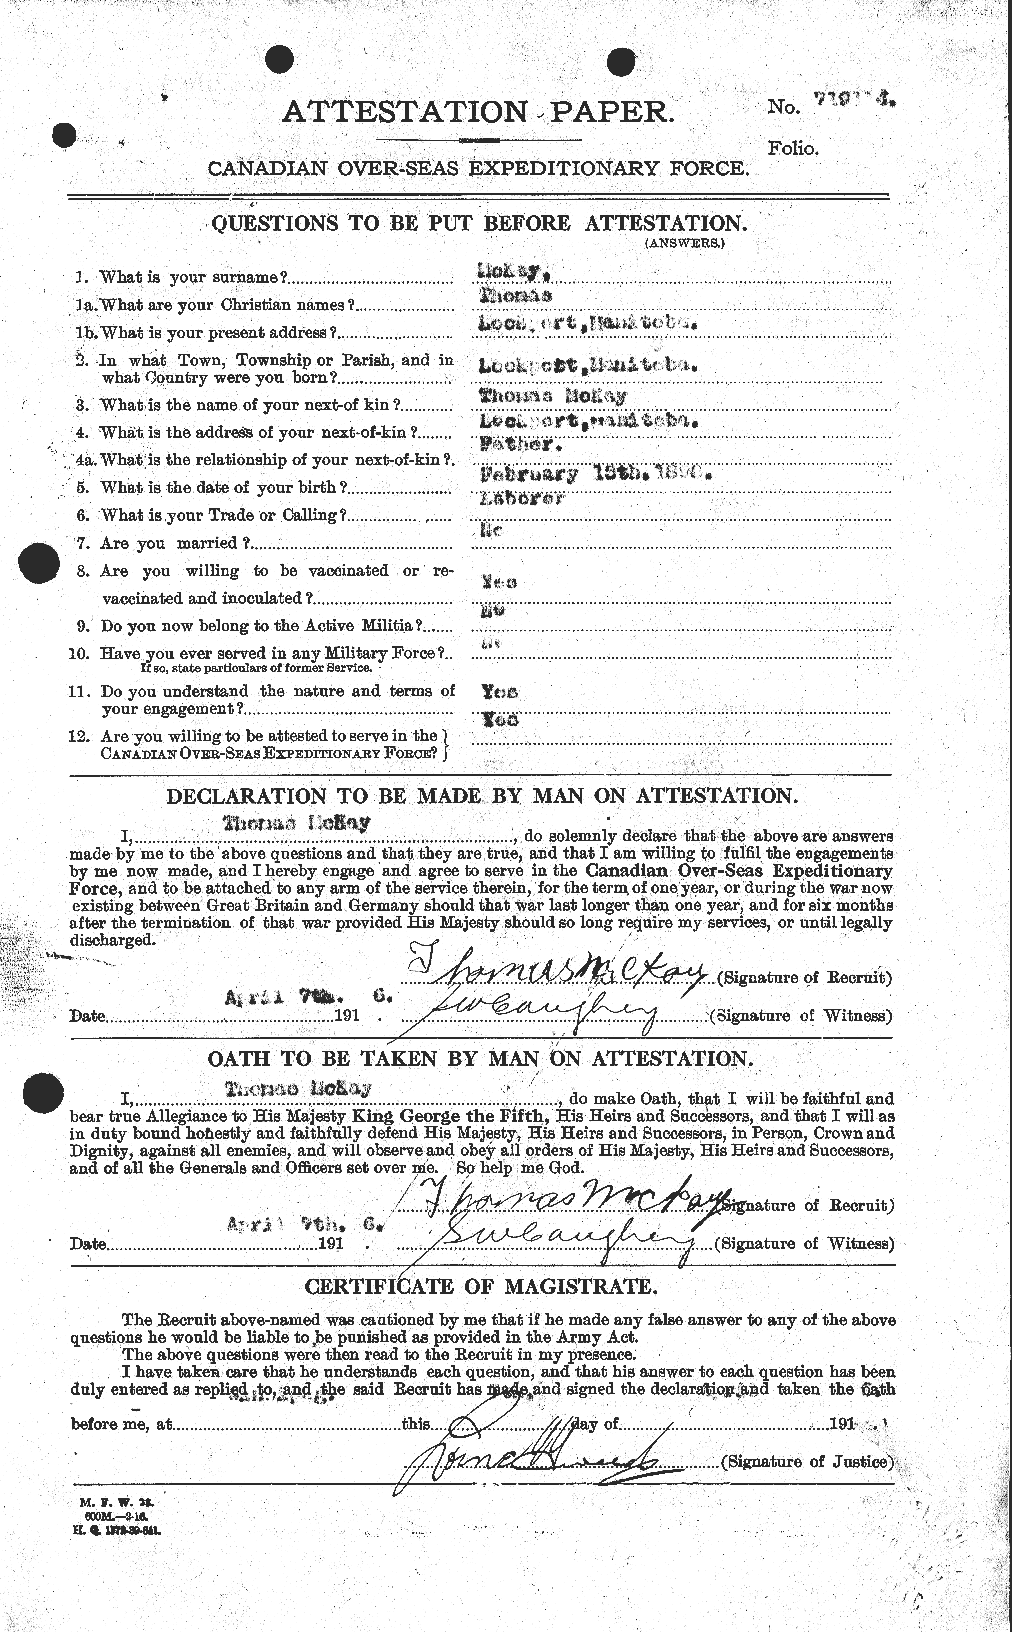 Personnel Records of the First World War - CEF 530159a